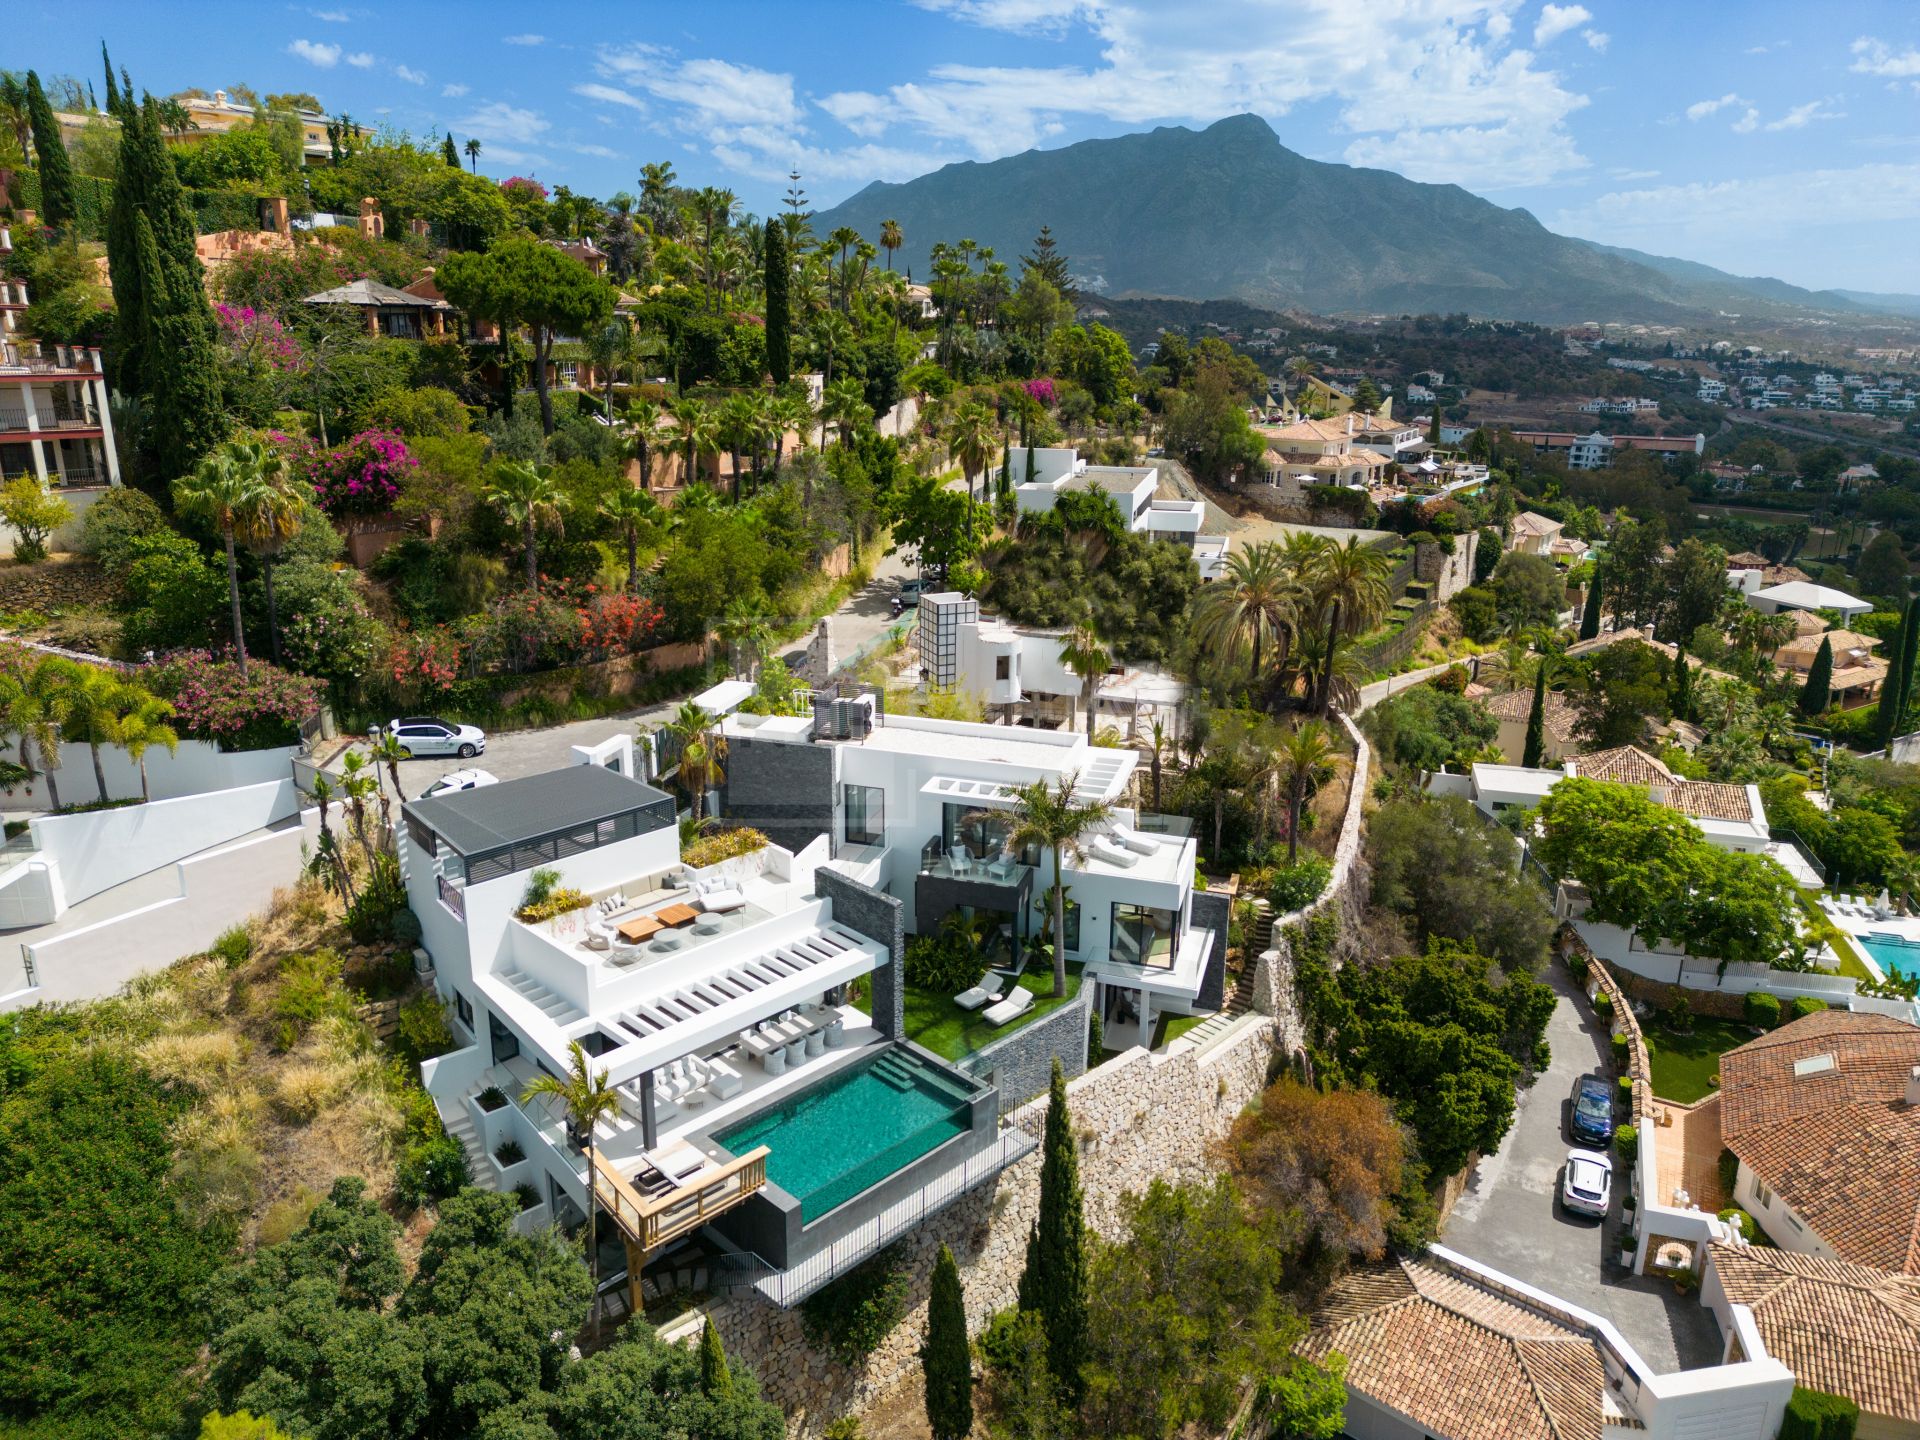 EXQUISITE MODERN VILLA WITH PANORAMIC VIEWS IN PRESTIGIOUS GATED COMMUNITY